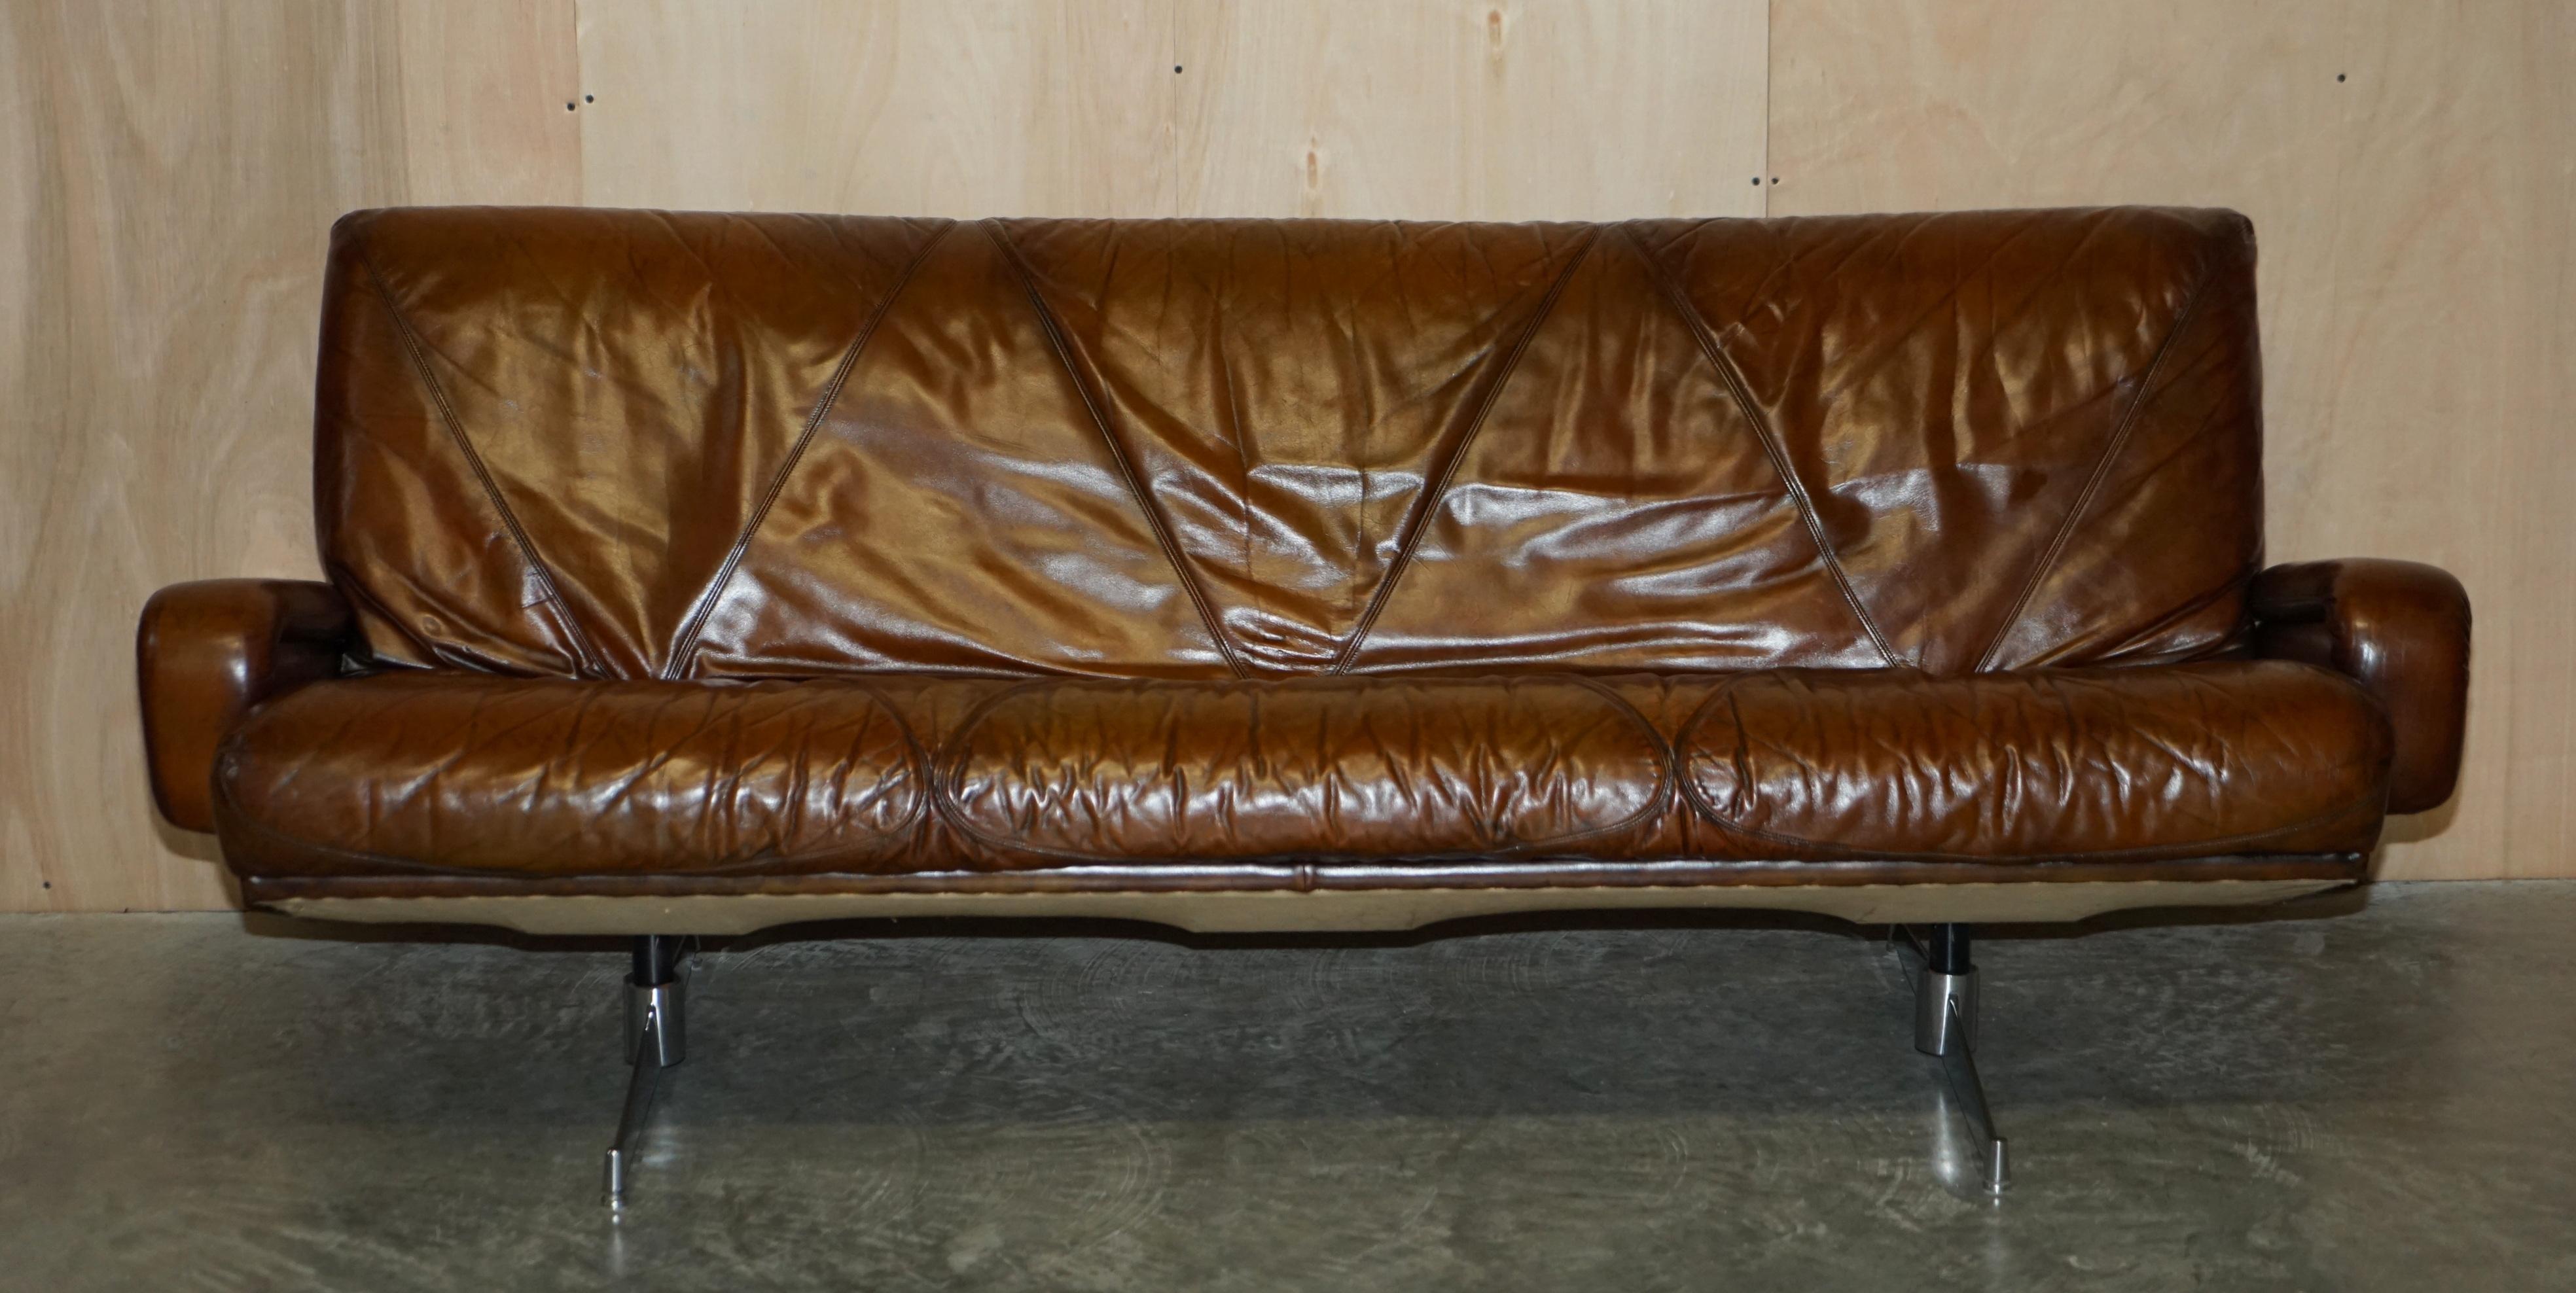 We are delighted to offer for sale this absolutely stunning, hand dyed whisky brown leather, mid century modern sofa which chrome legs.

A very well made, decorative and extremely comfortable sofa. This is one of the most stylish pieces we have